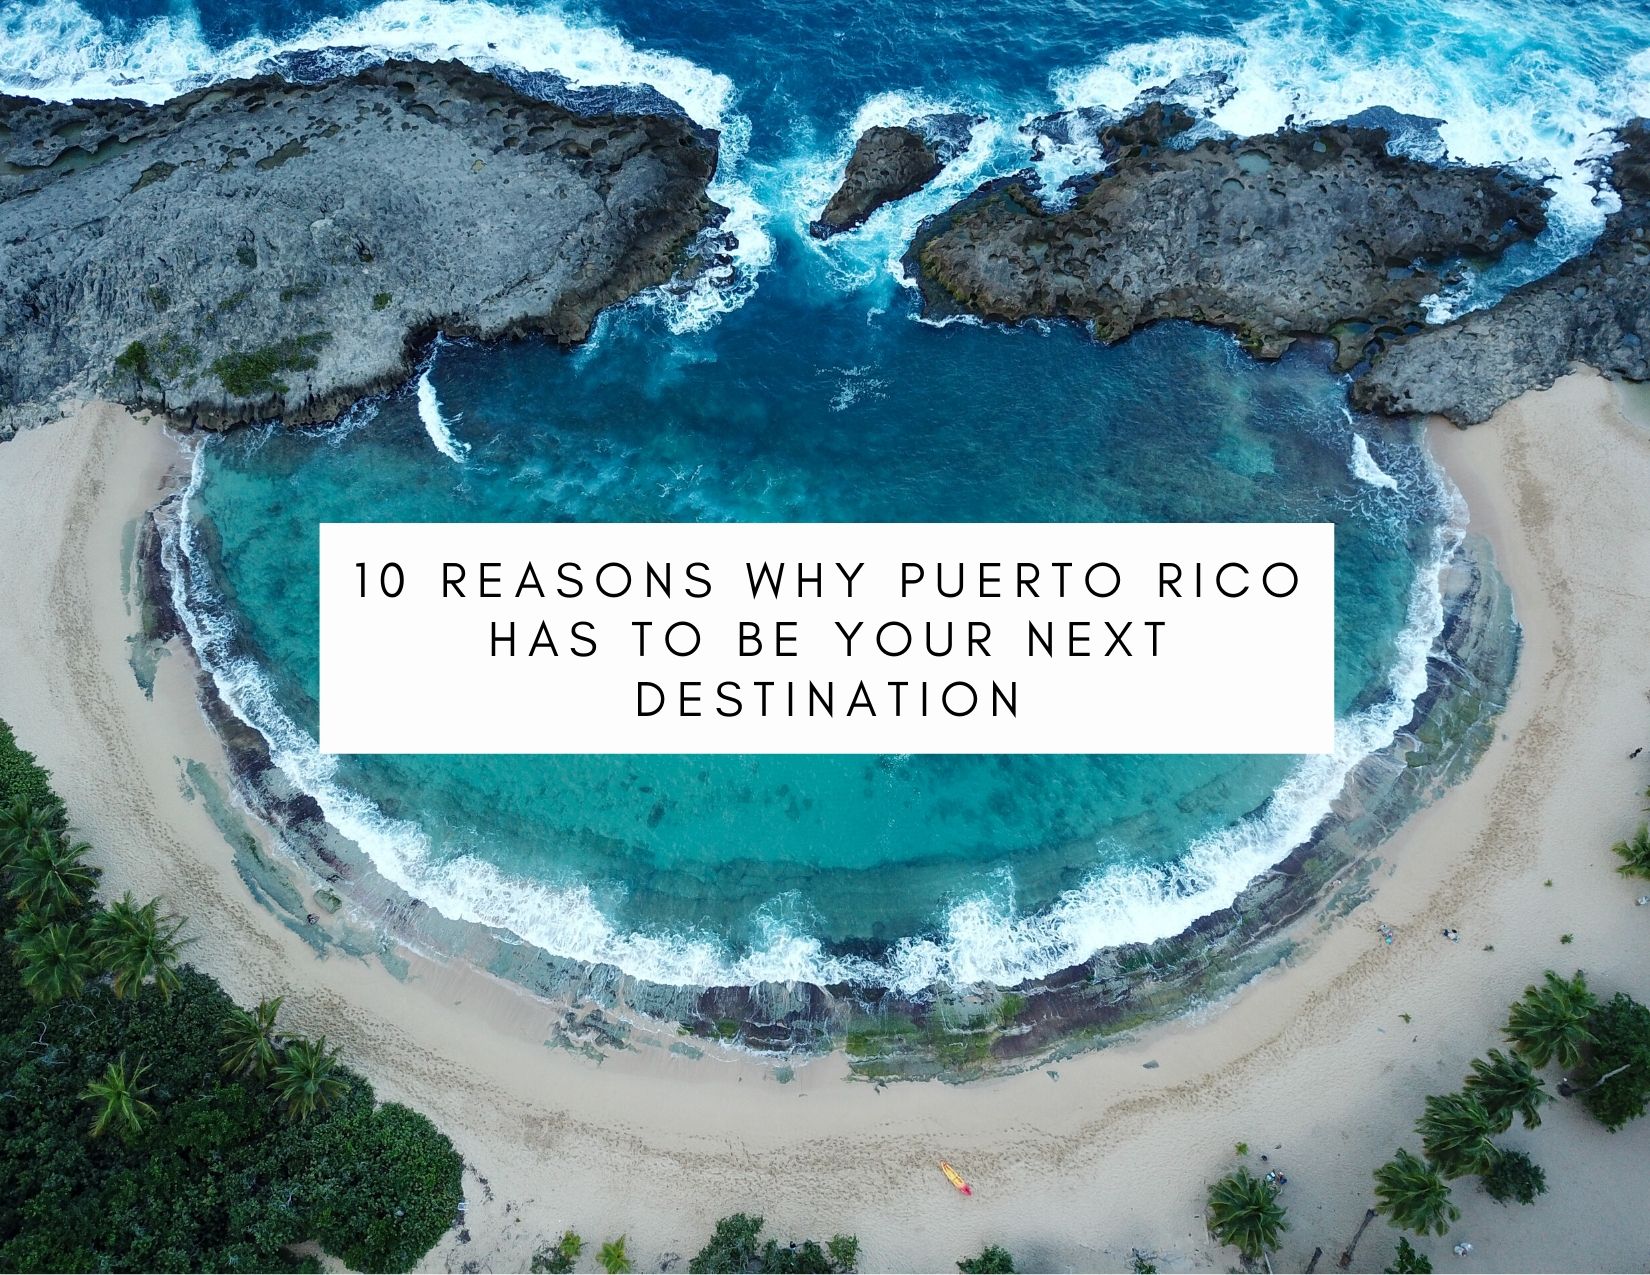 10 Reasons Why Puerto Rico Has To Be Your Next Destination - My